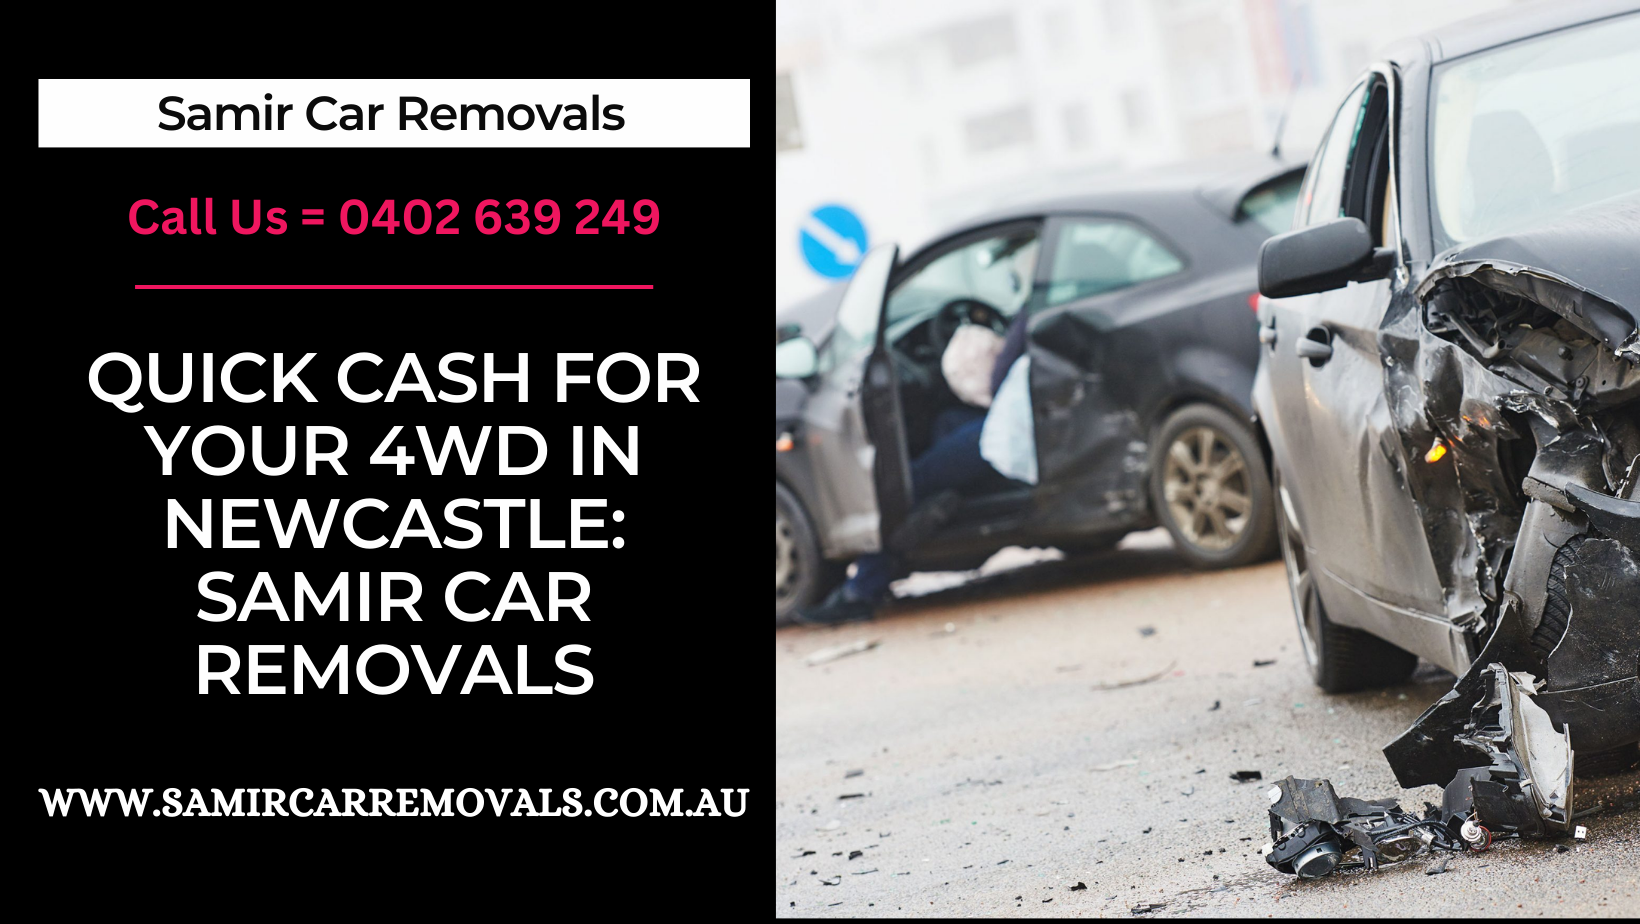 Quick Cash For Your 4WD in Newcastle: Samir Car Removals